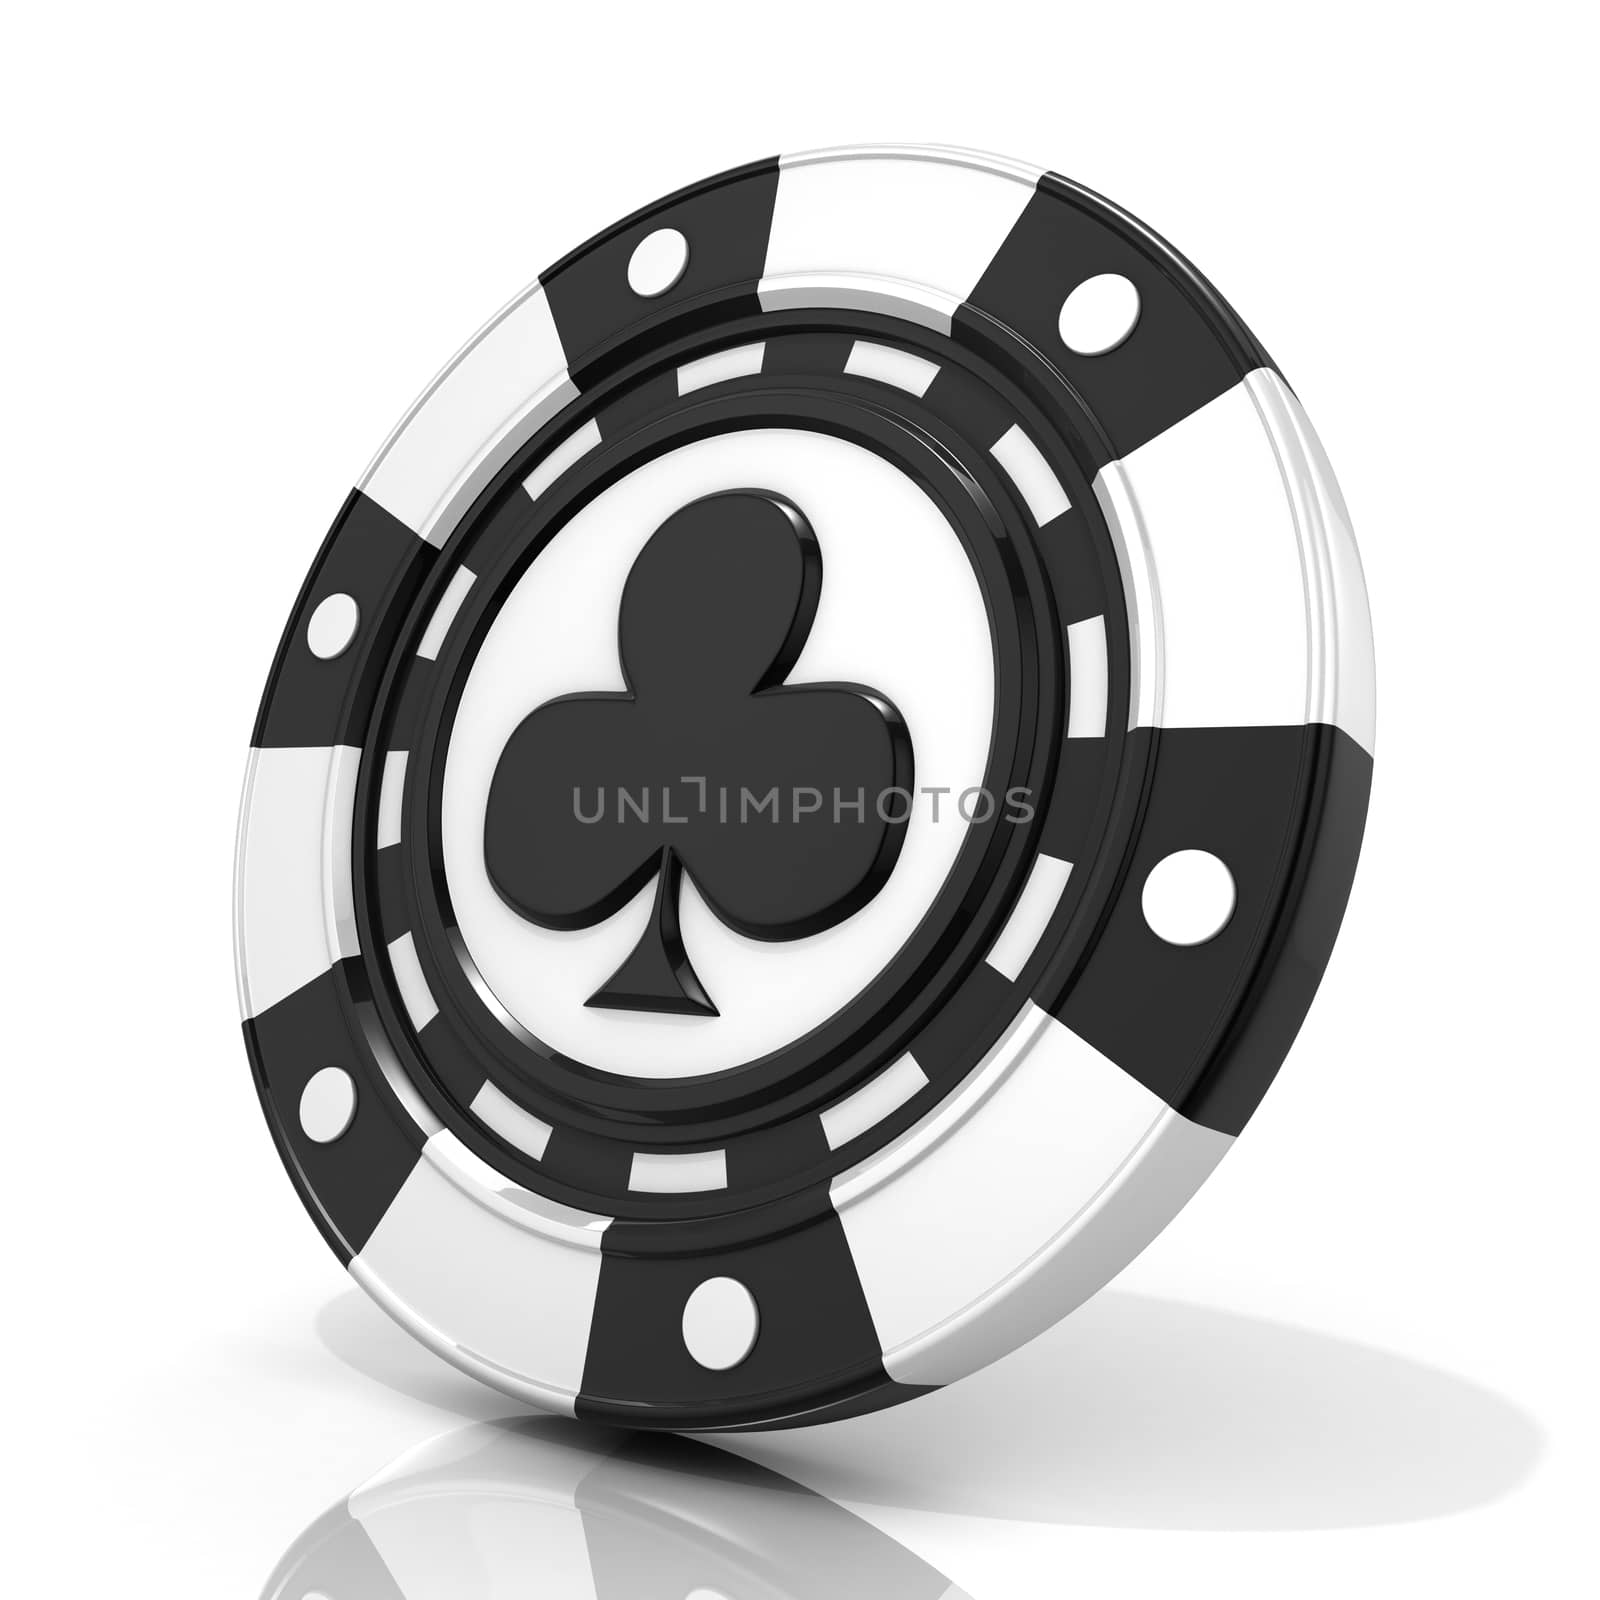 Black gambling chip with club sign on it. 3D render isolated on white background